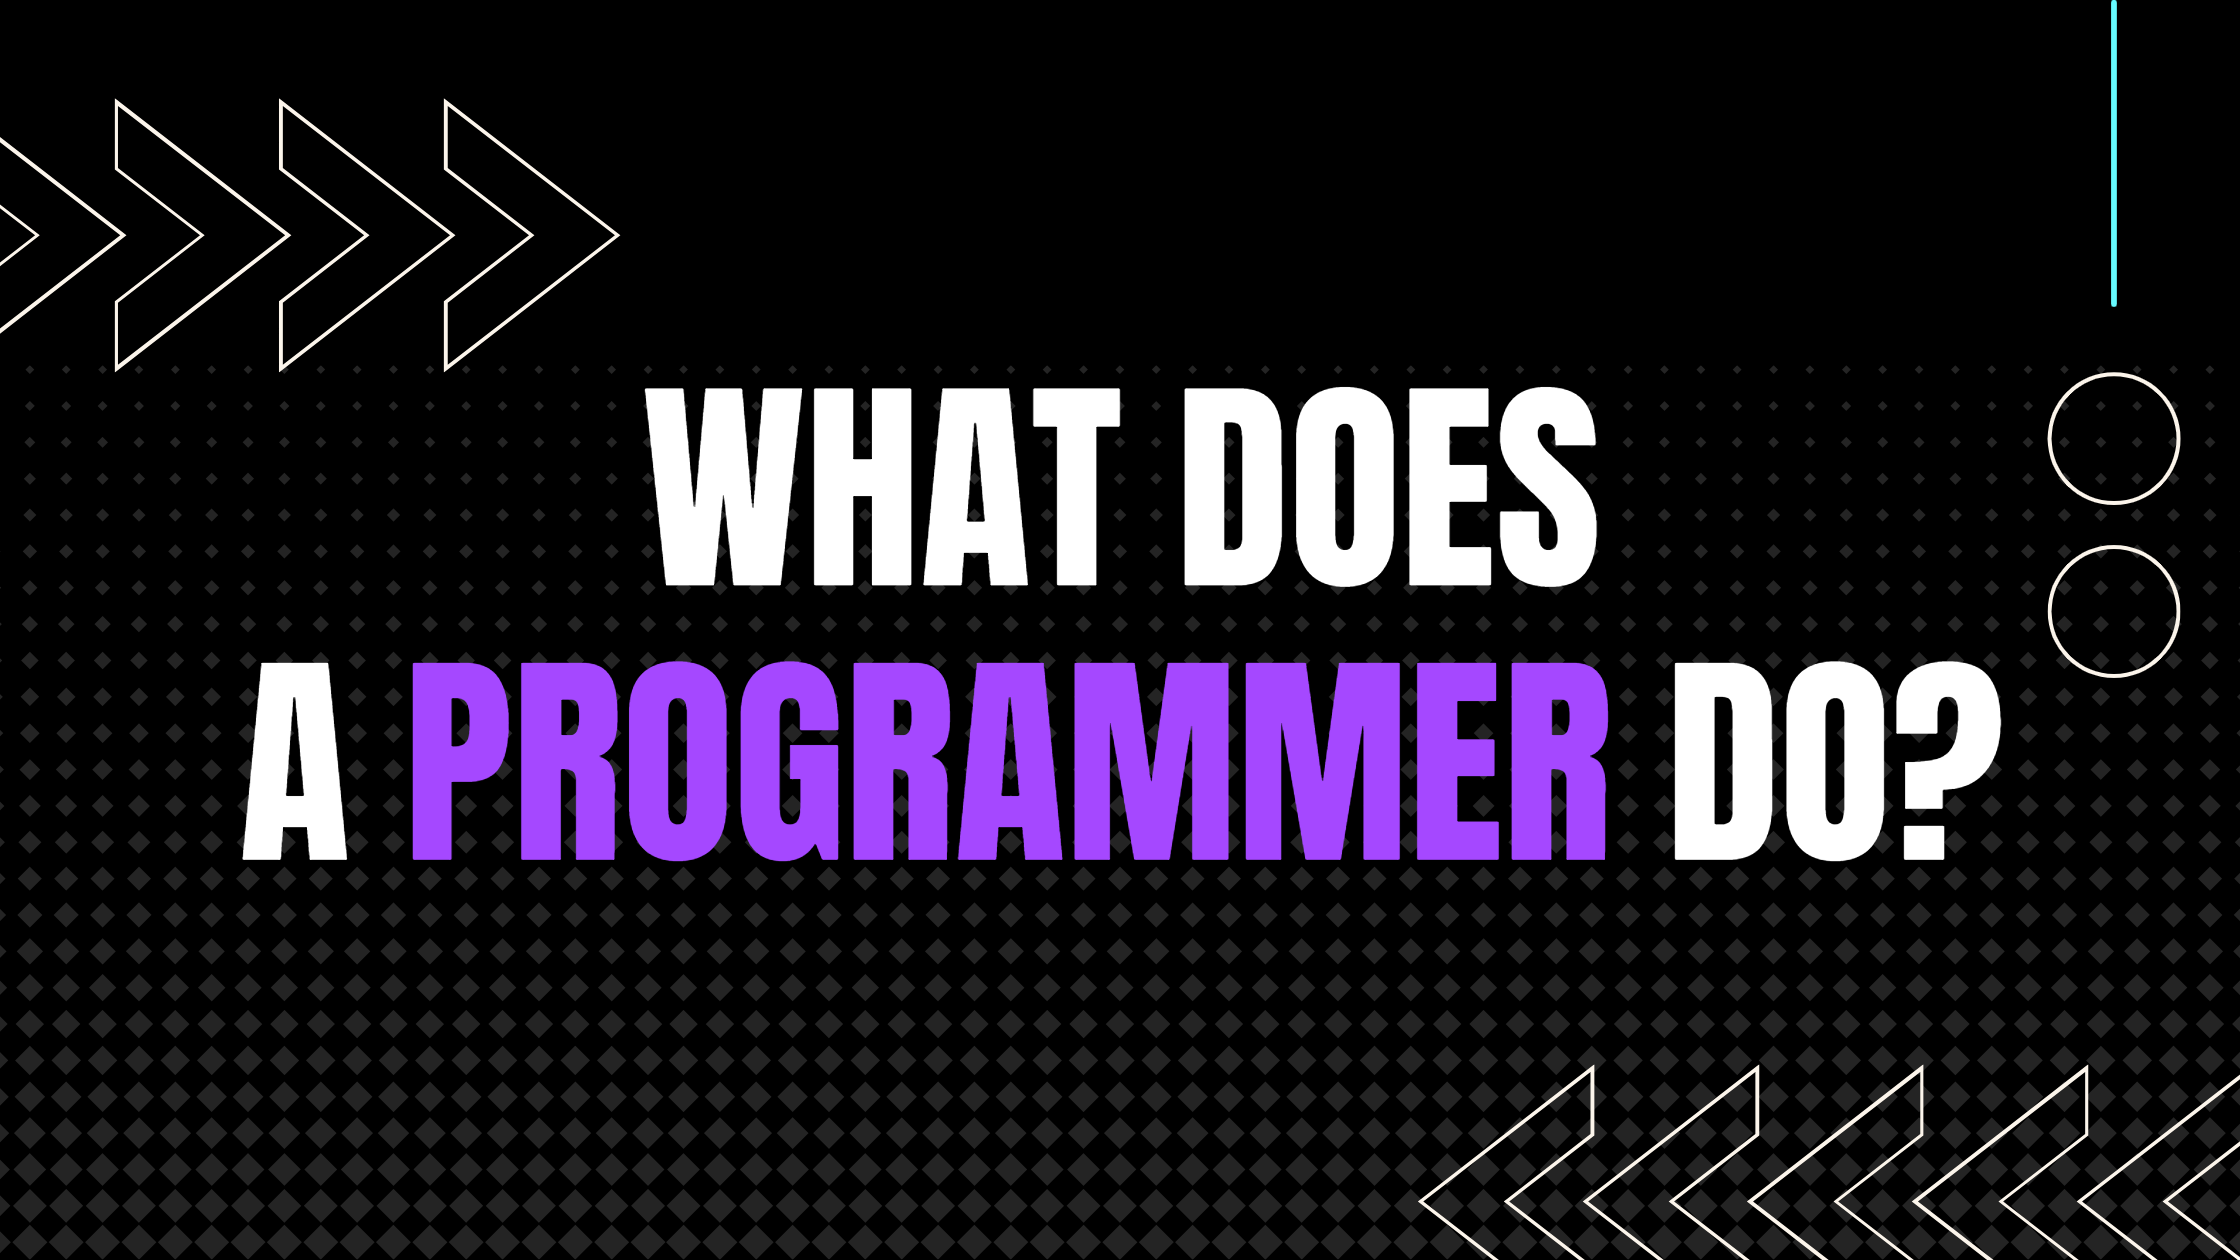 What is your job as a programmer?